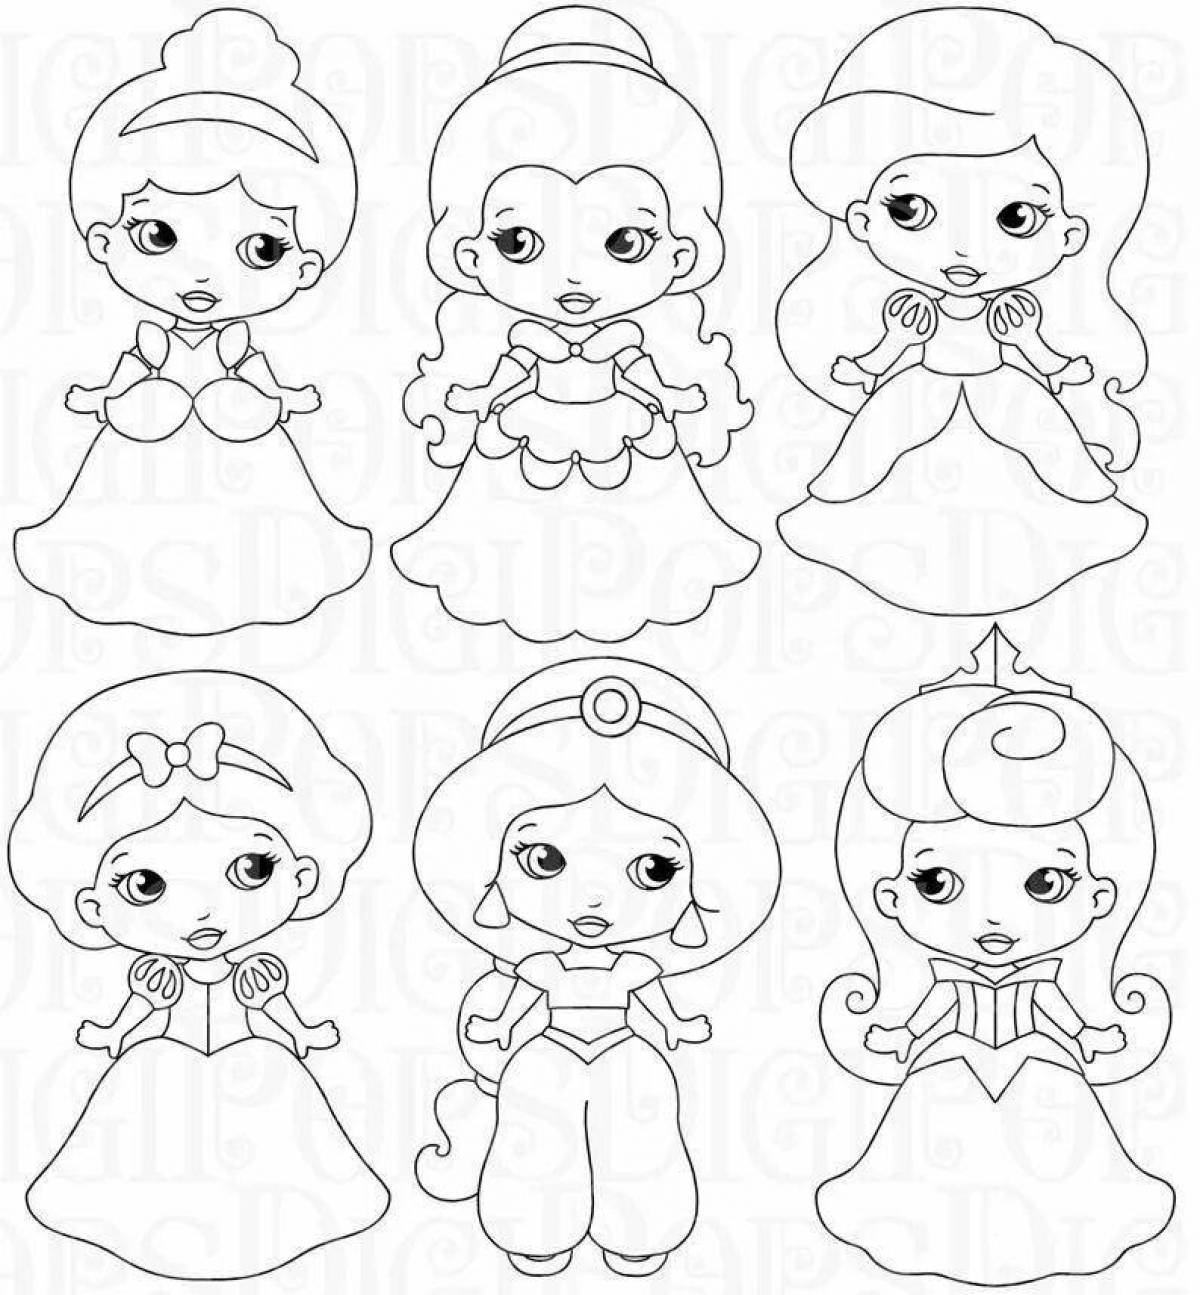 Coloring page charming little princess